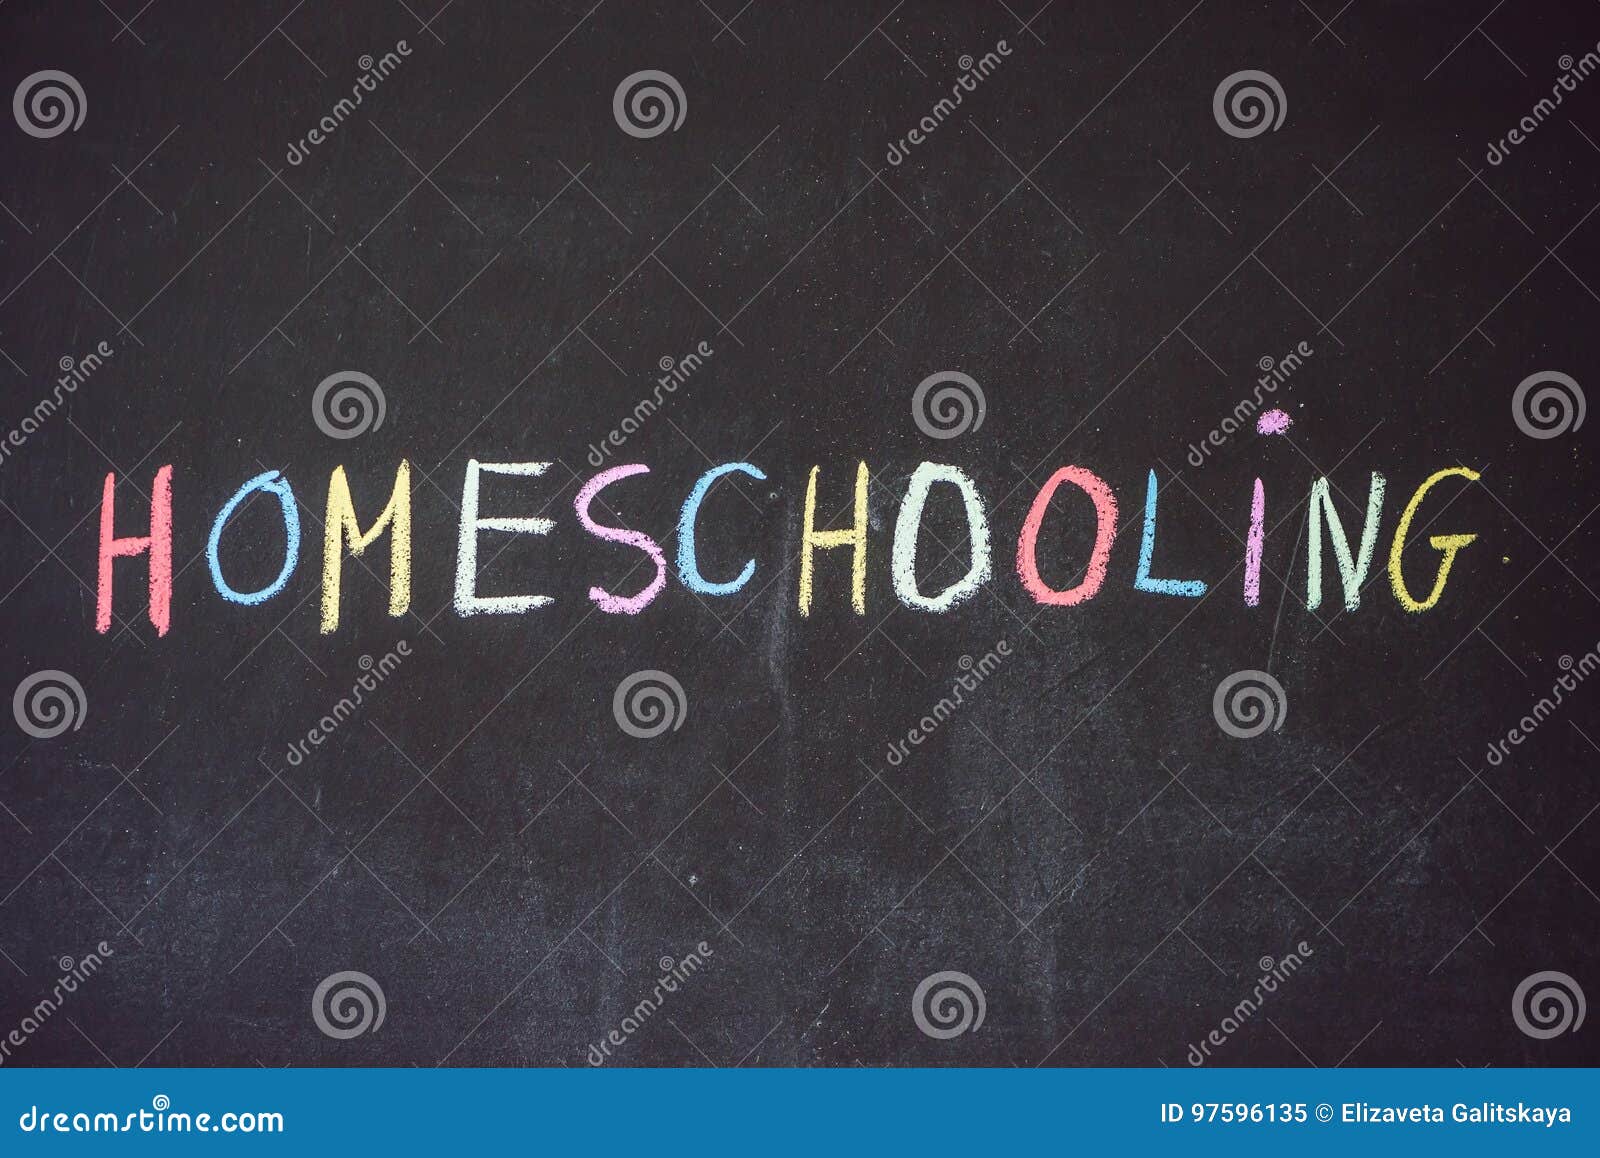 homeschooling. child pointing at word homeschooling on a blackboard